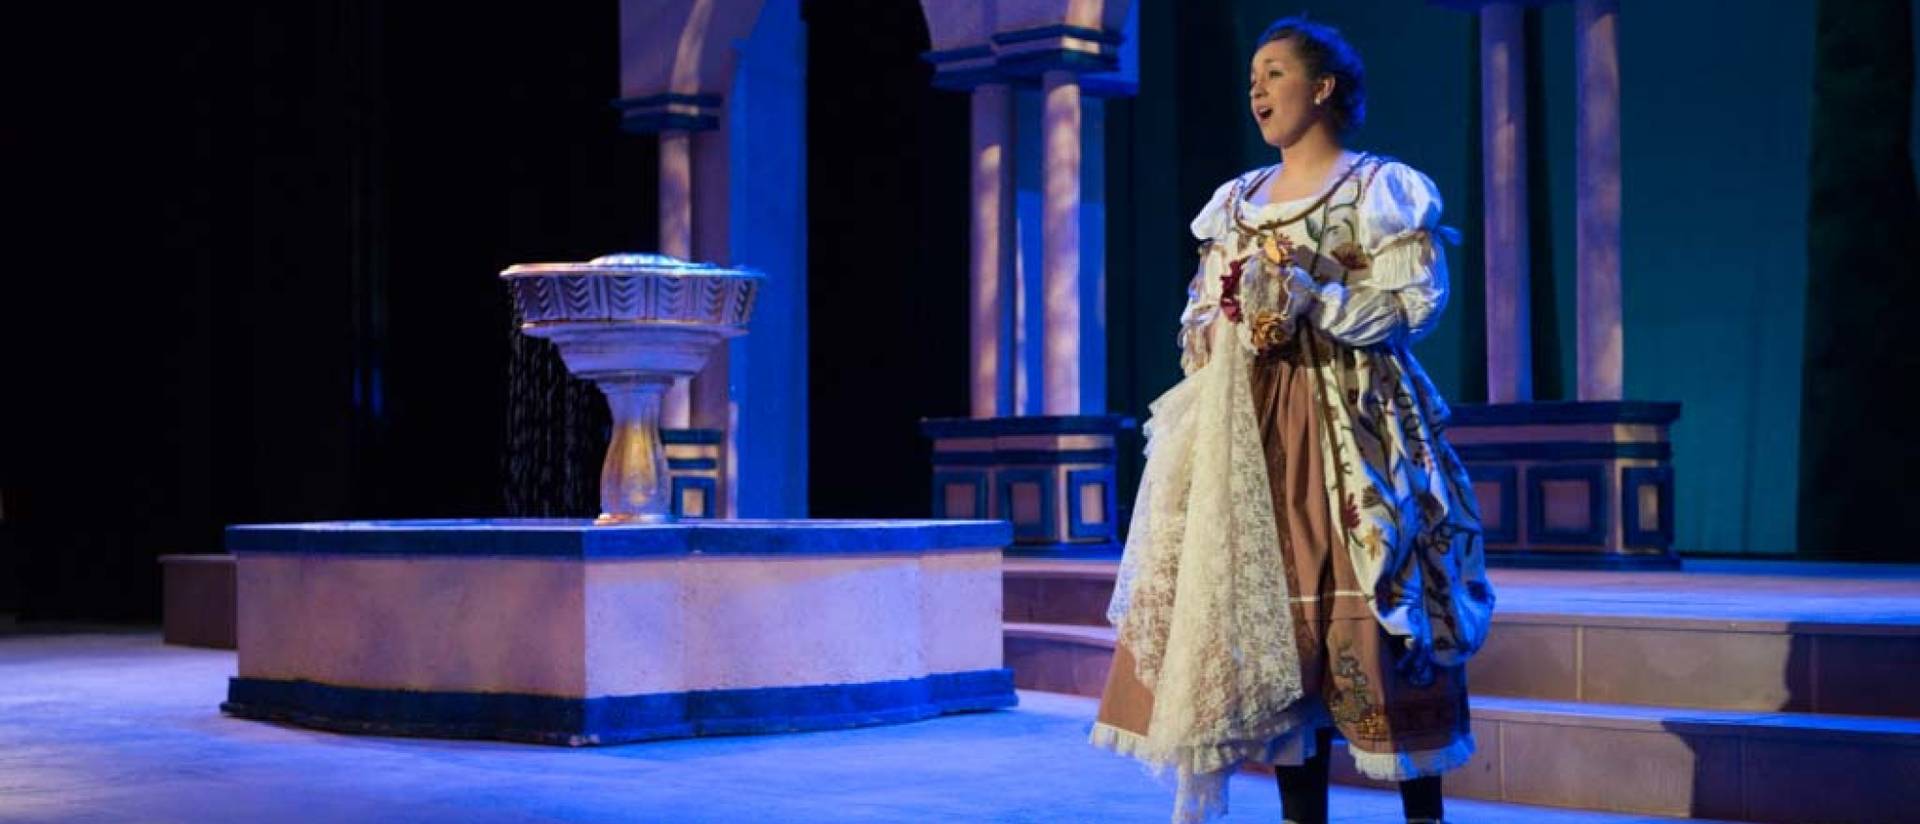 Gina Cruciani sings in the role of Susanna during a spring 2015 performance of the opera “The Marriage of Figaro.”